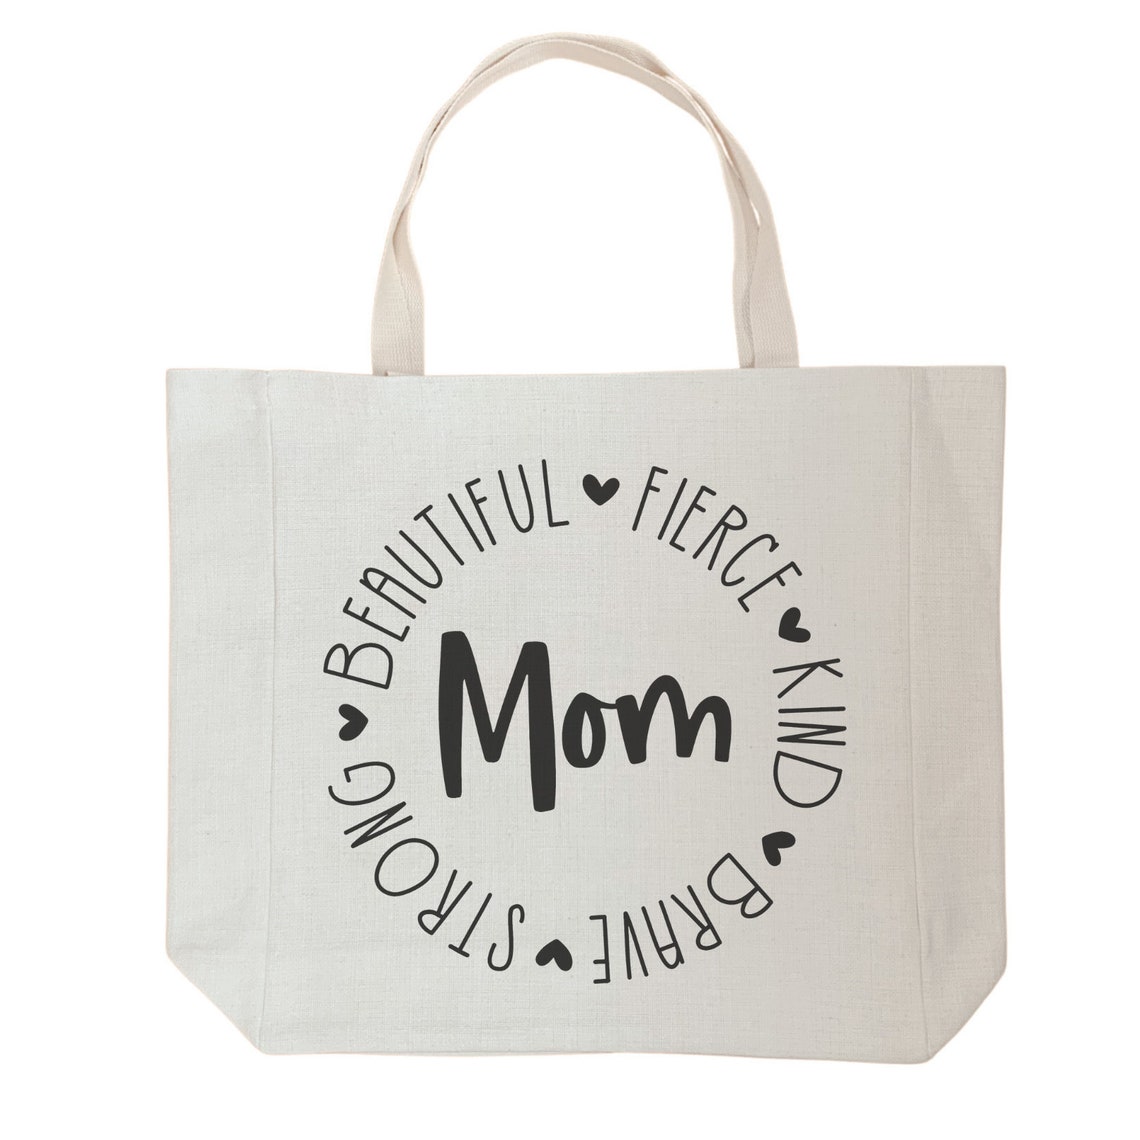 Tote Bag Personalized Mom Tote Bag Inspirational Quotes | Etsy